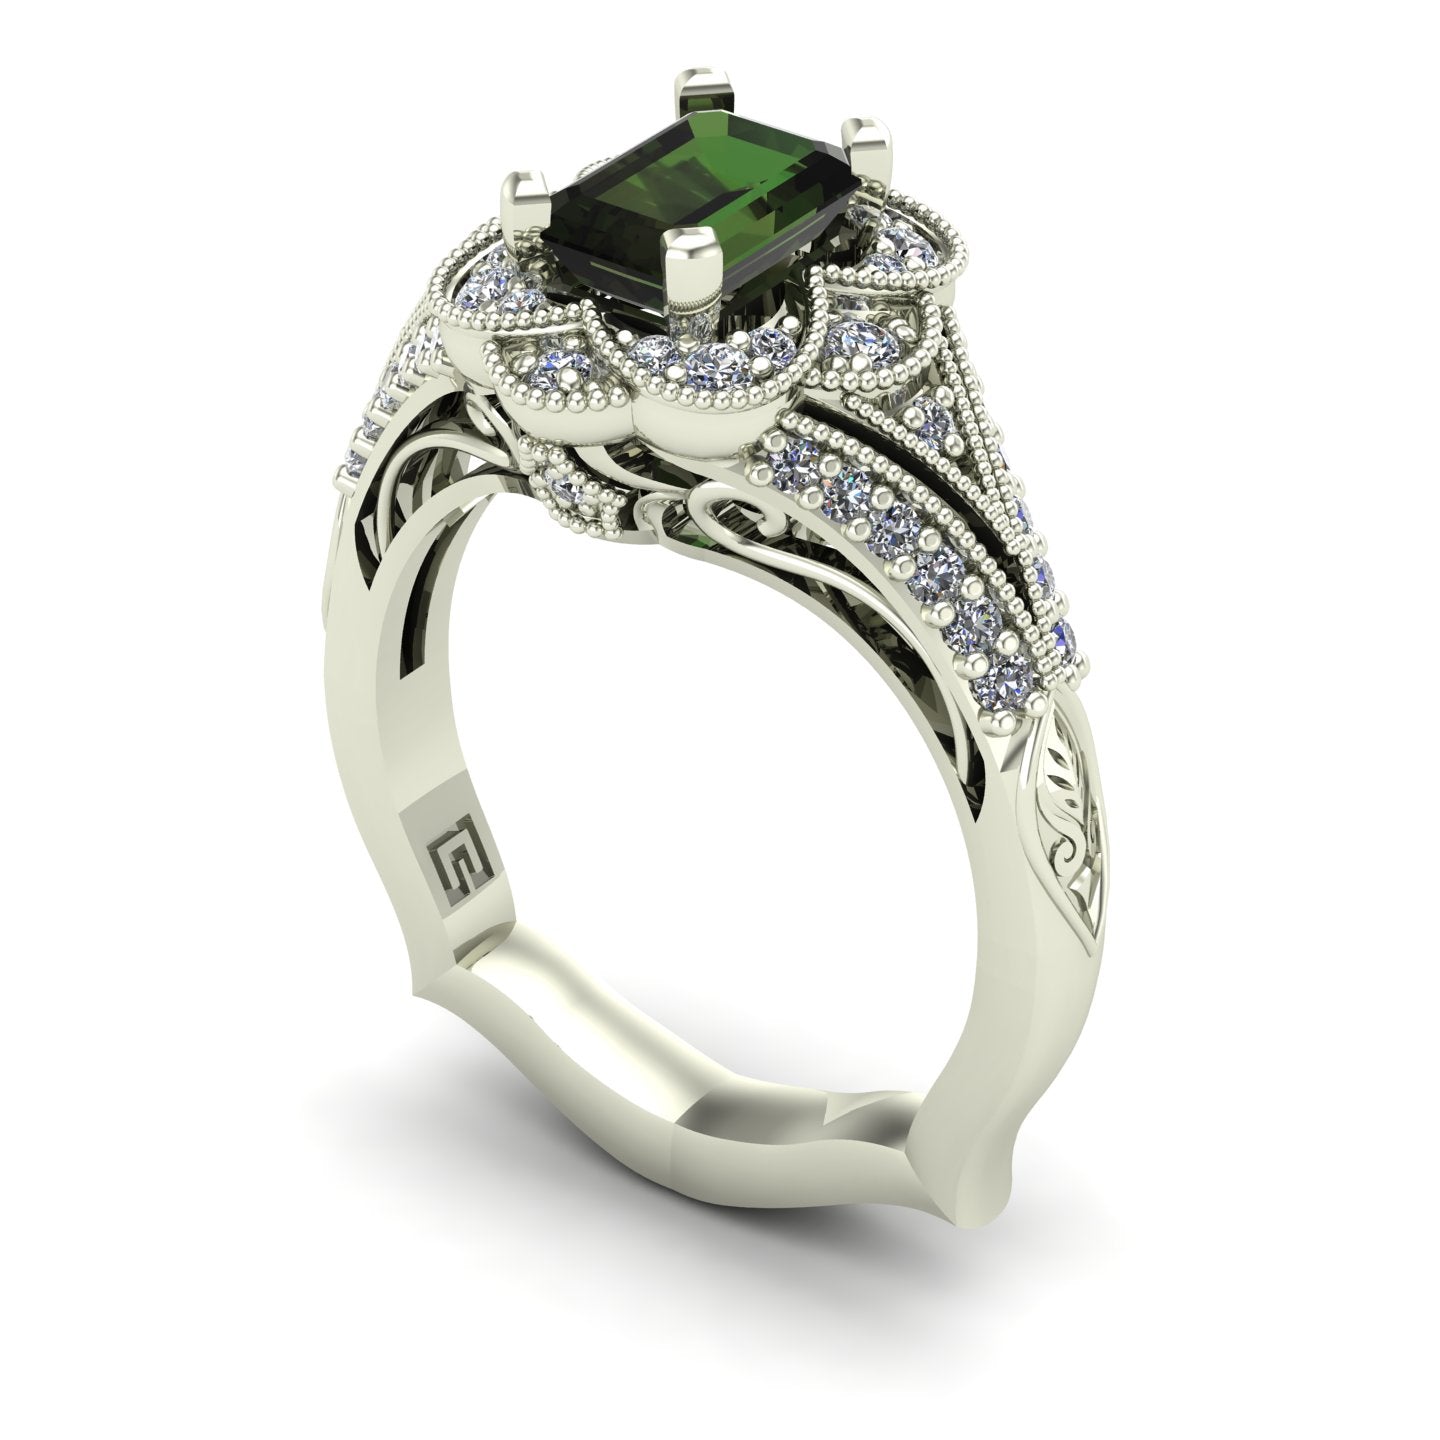 emerald cut green tourmaline and diamond scallop halo ring in 14k white gold - Charles Babb Designs